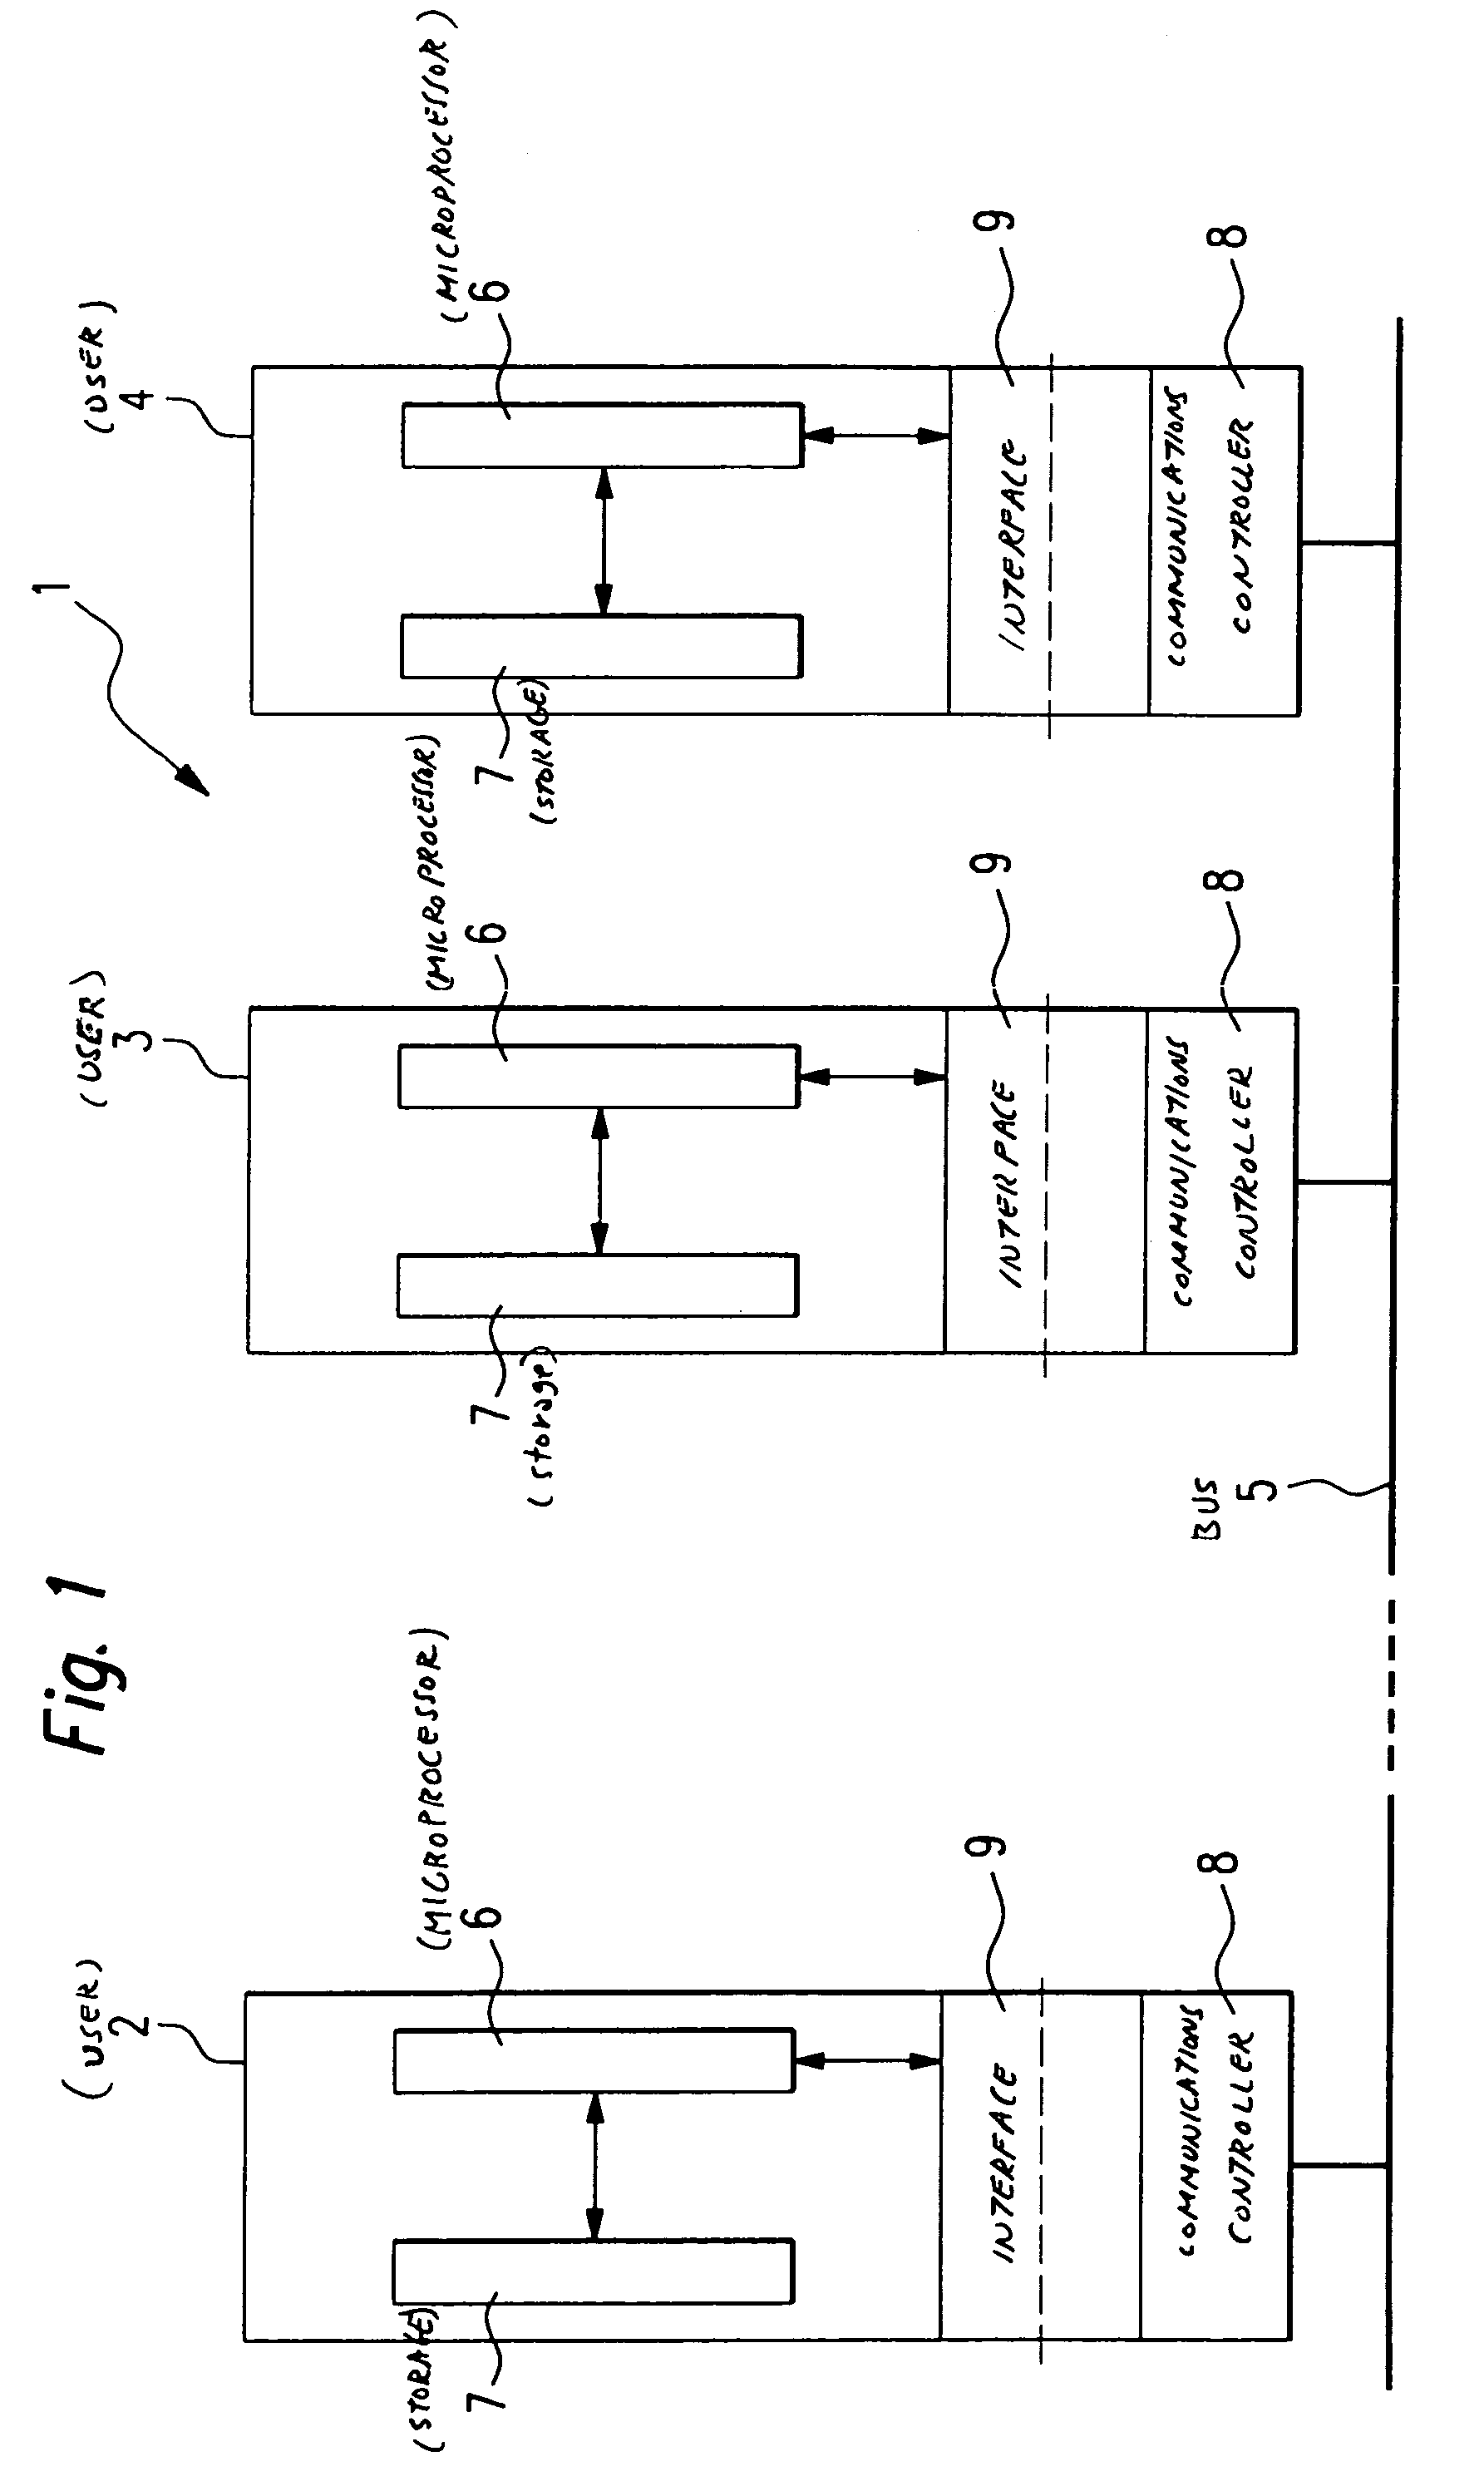 Method and communication system for data exchanging data between users of a bus system